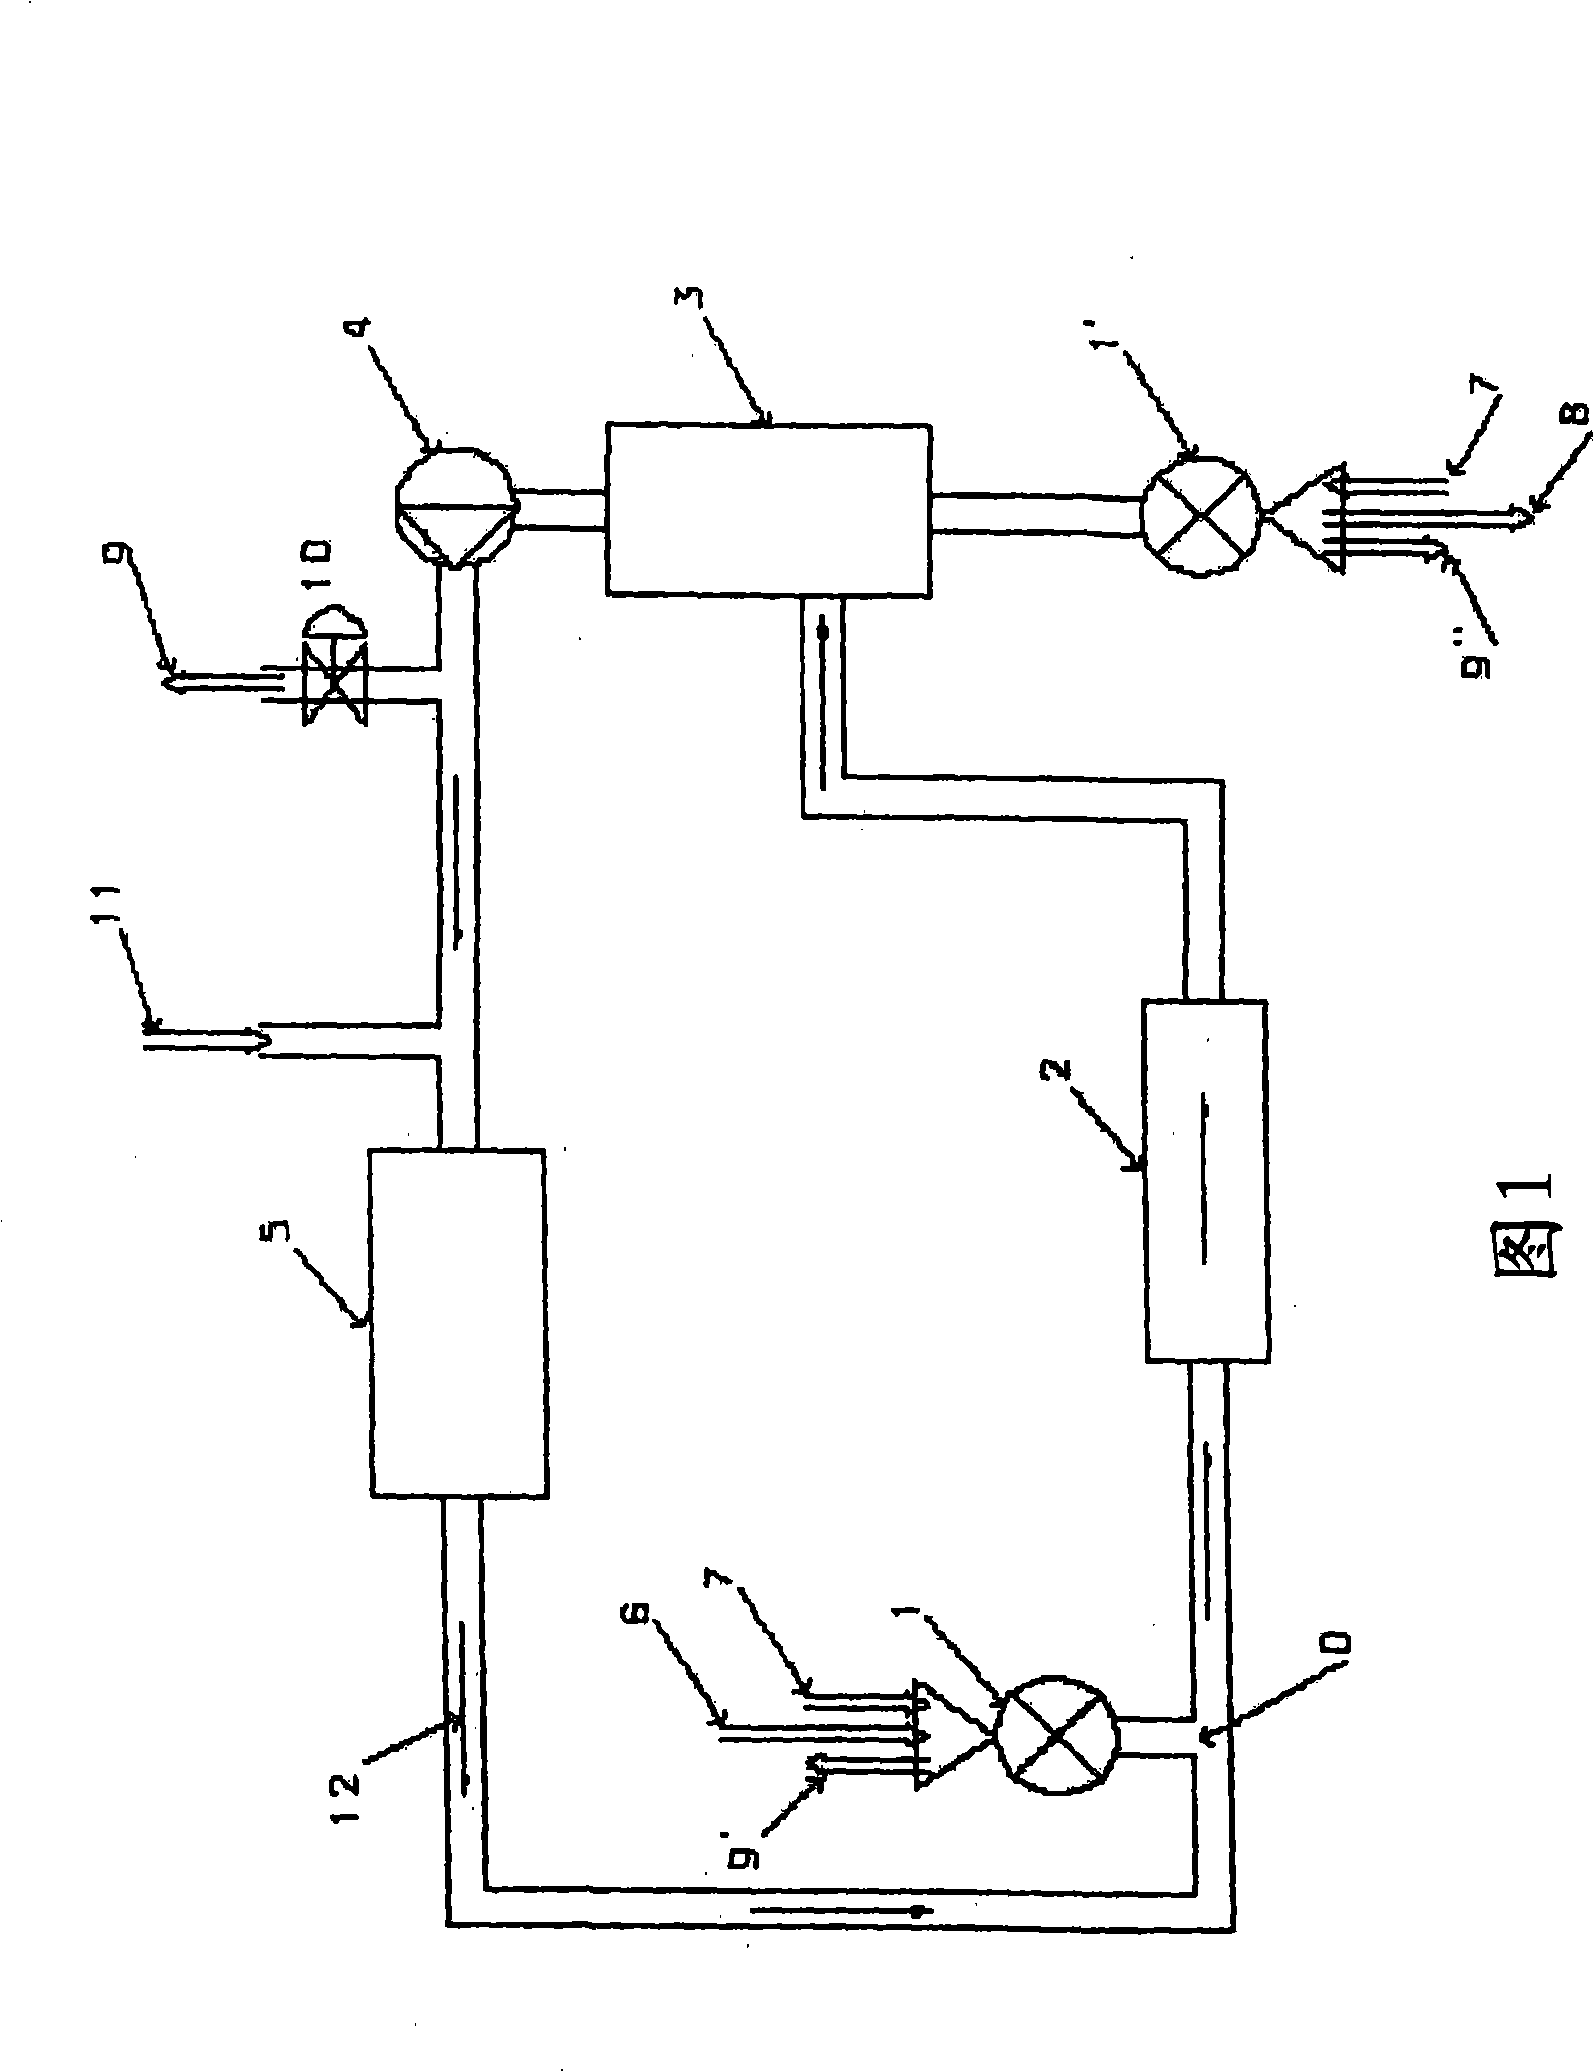 Method of increasing the efficiency of drier, particularly a stream drier